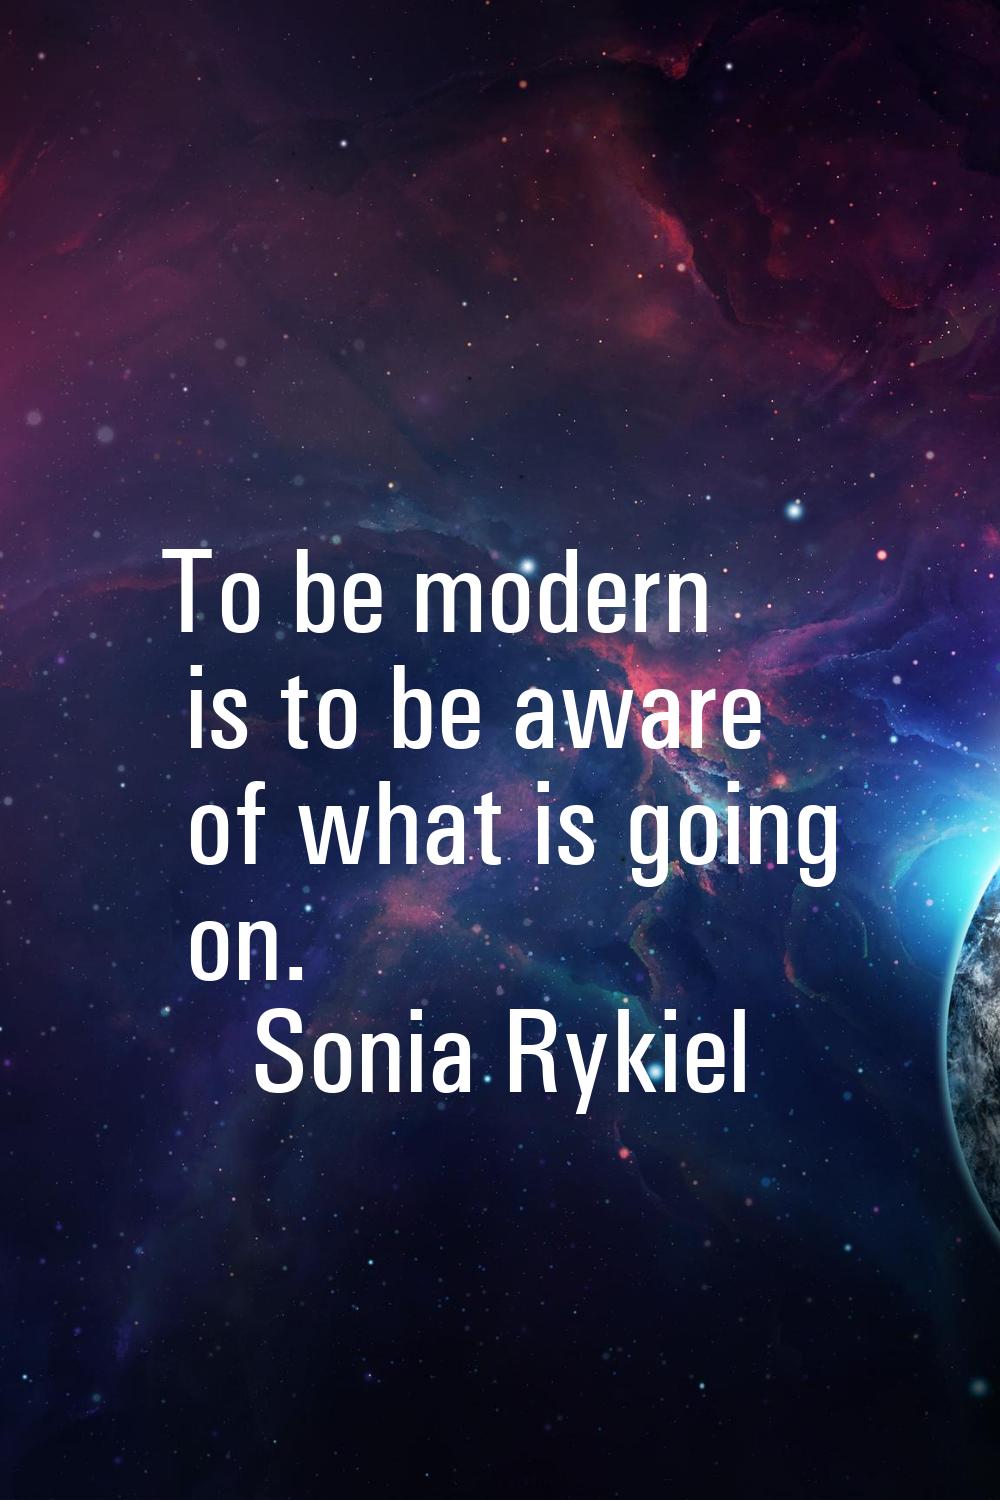 To be modern is to be aware of what is going on.